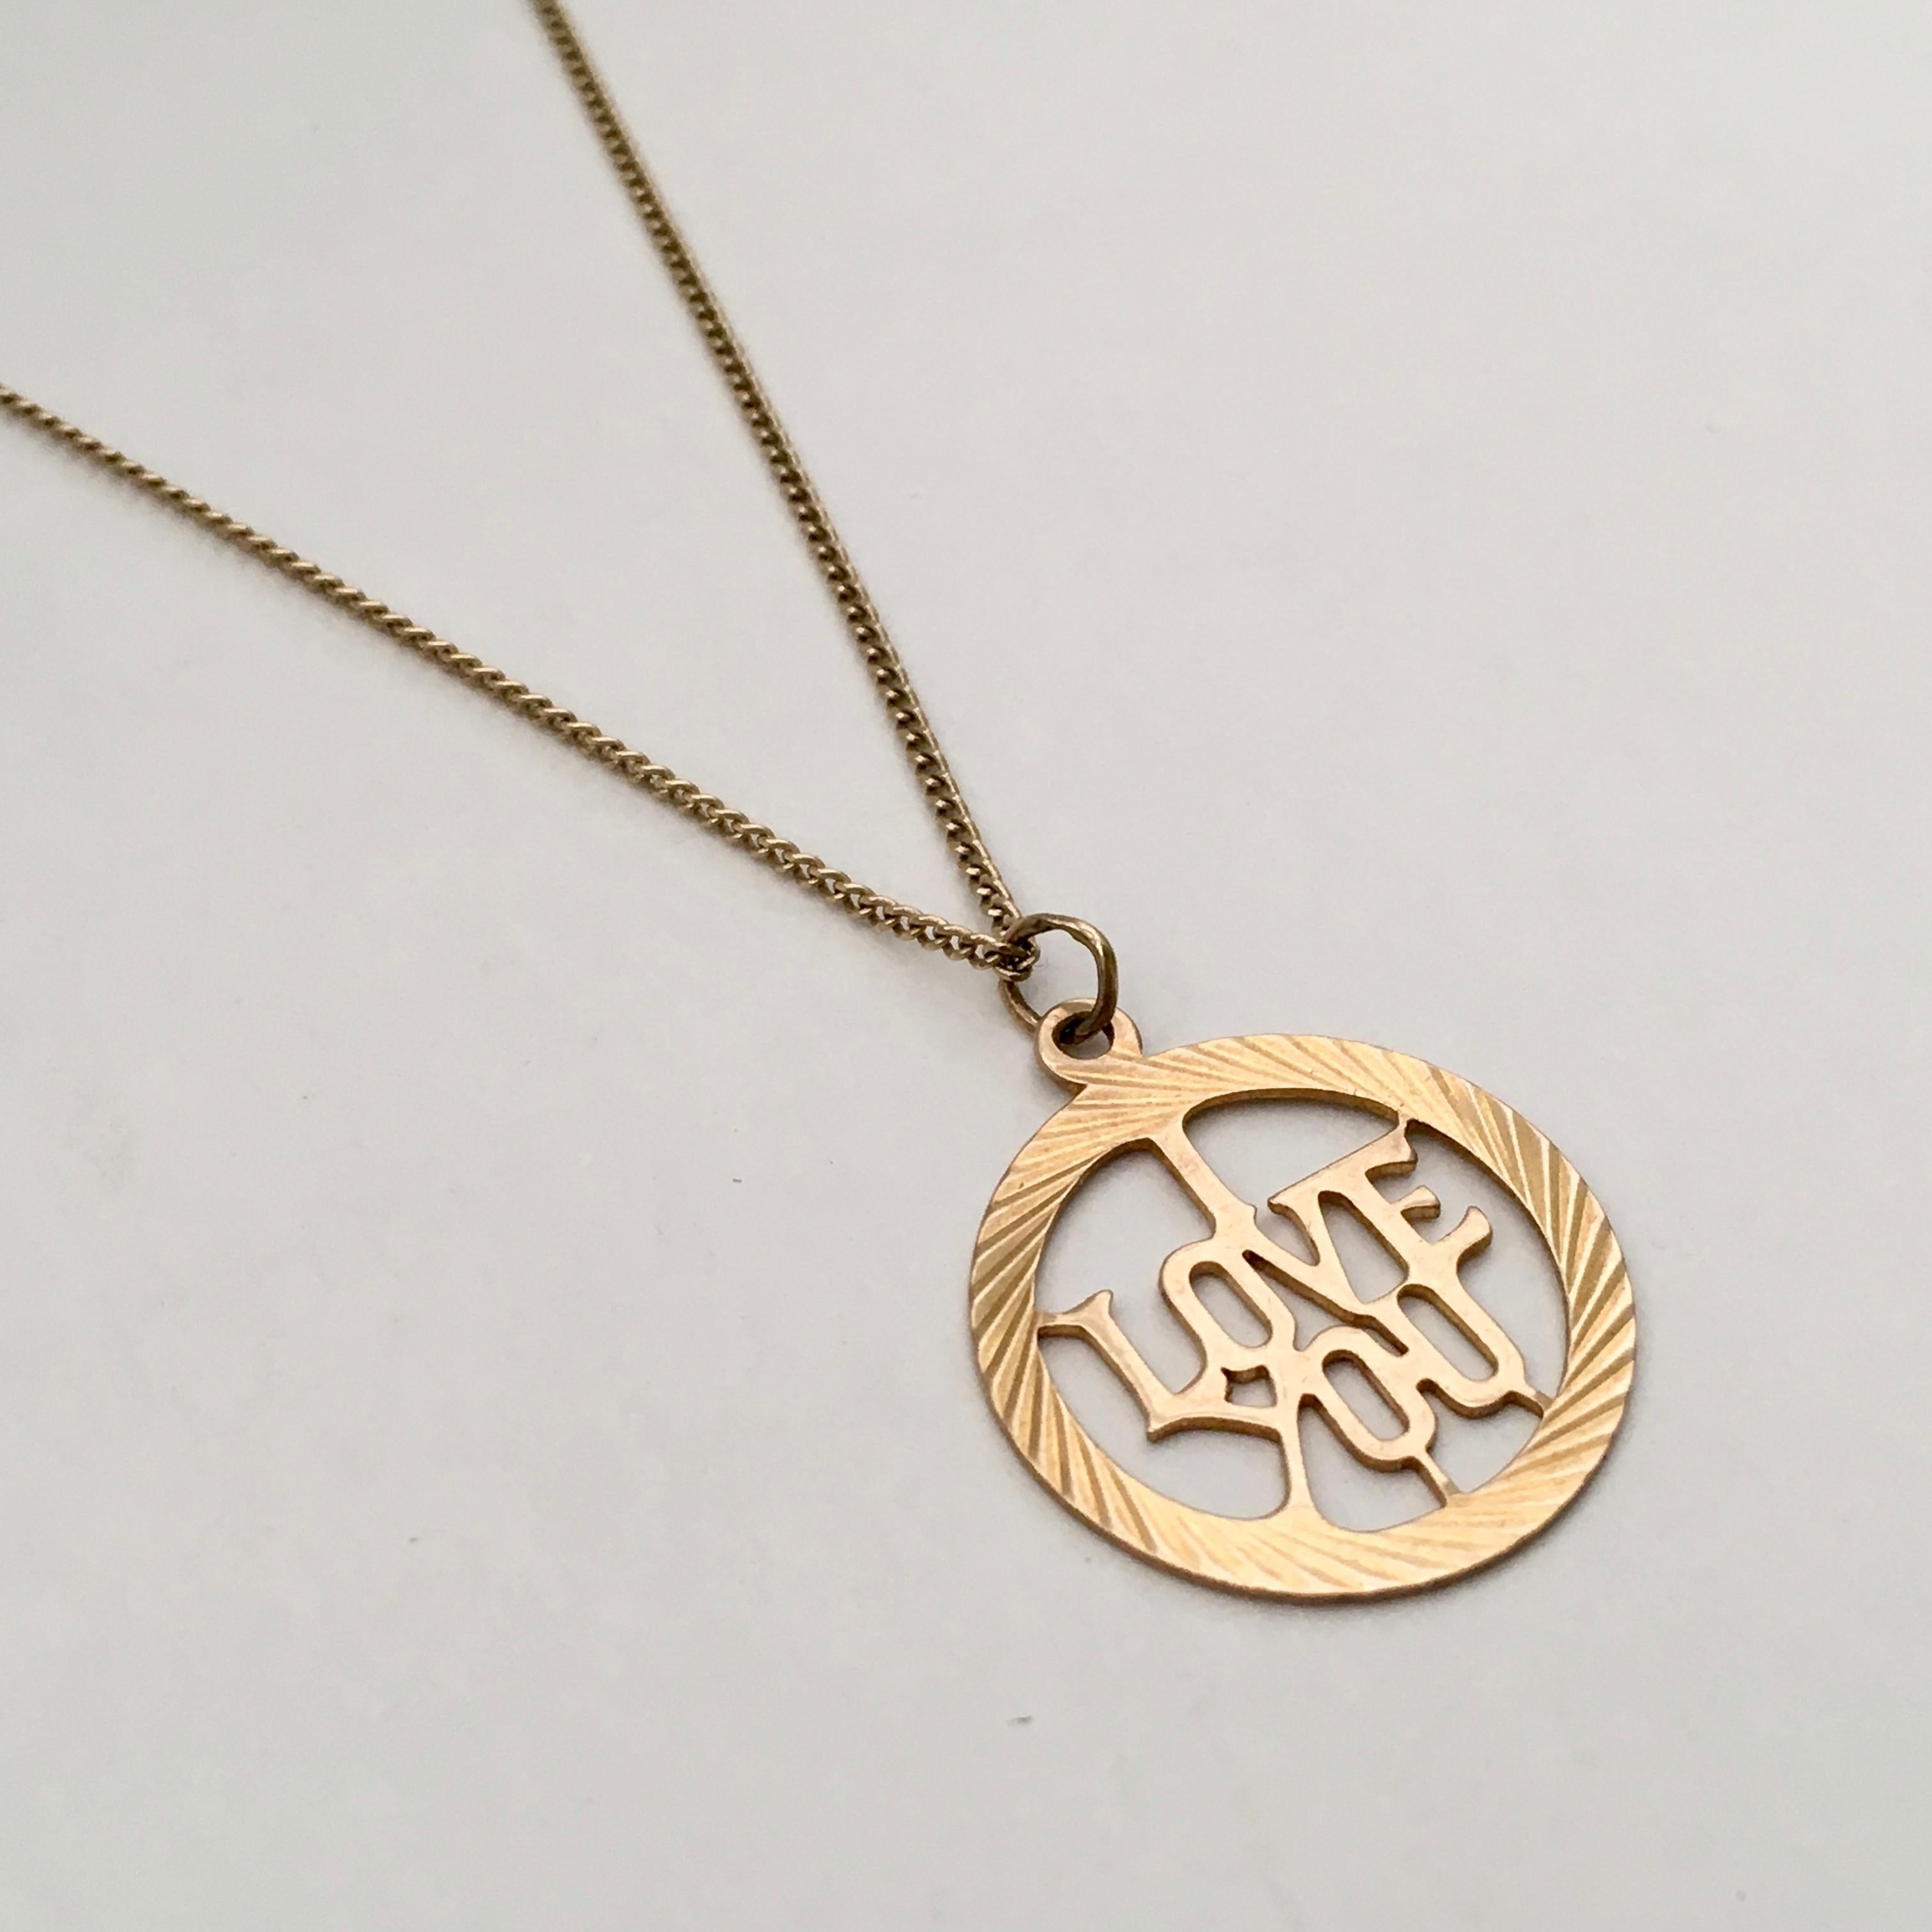 This stylish vintage charm has a whimsical air. The central 'I love you' pierce lettering sits within an engine-turned circular surround. Full hallmarks date the piece to 1969 and tell us that is was assayed in London. A makers mark of 'GJ Ltd' is